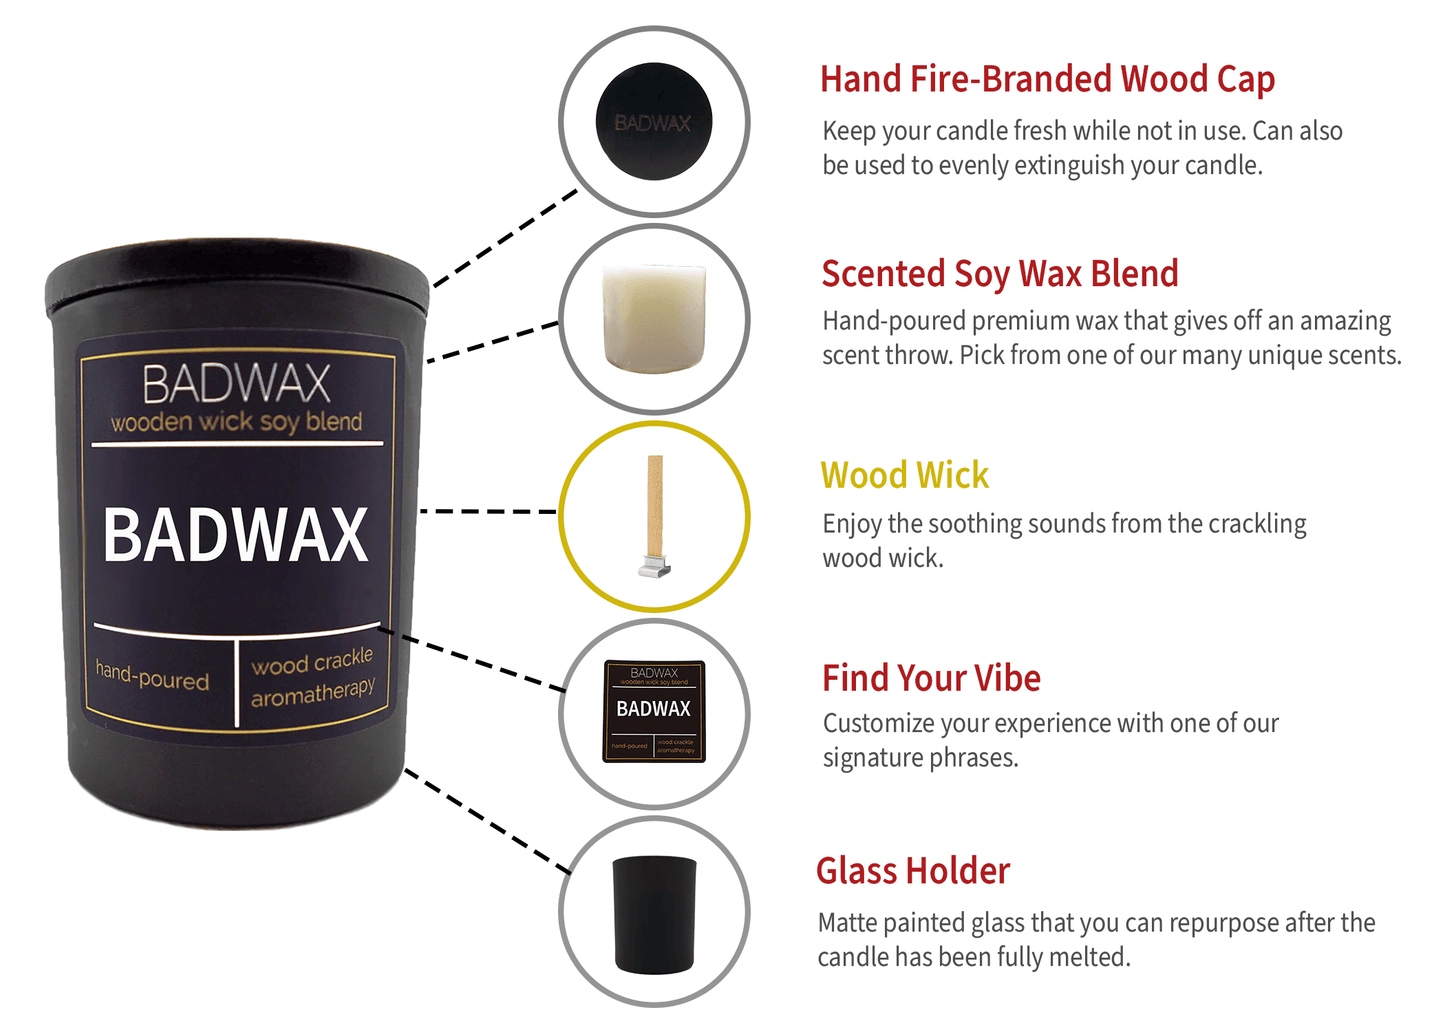 Daddy - Woodwick Candle - BADWAX